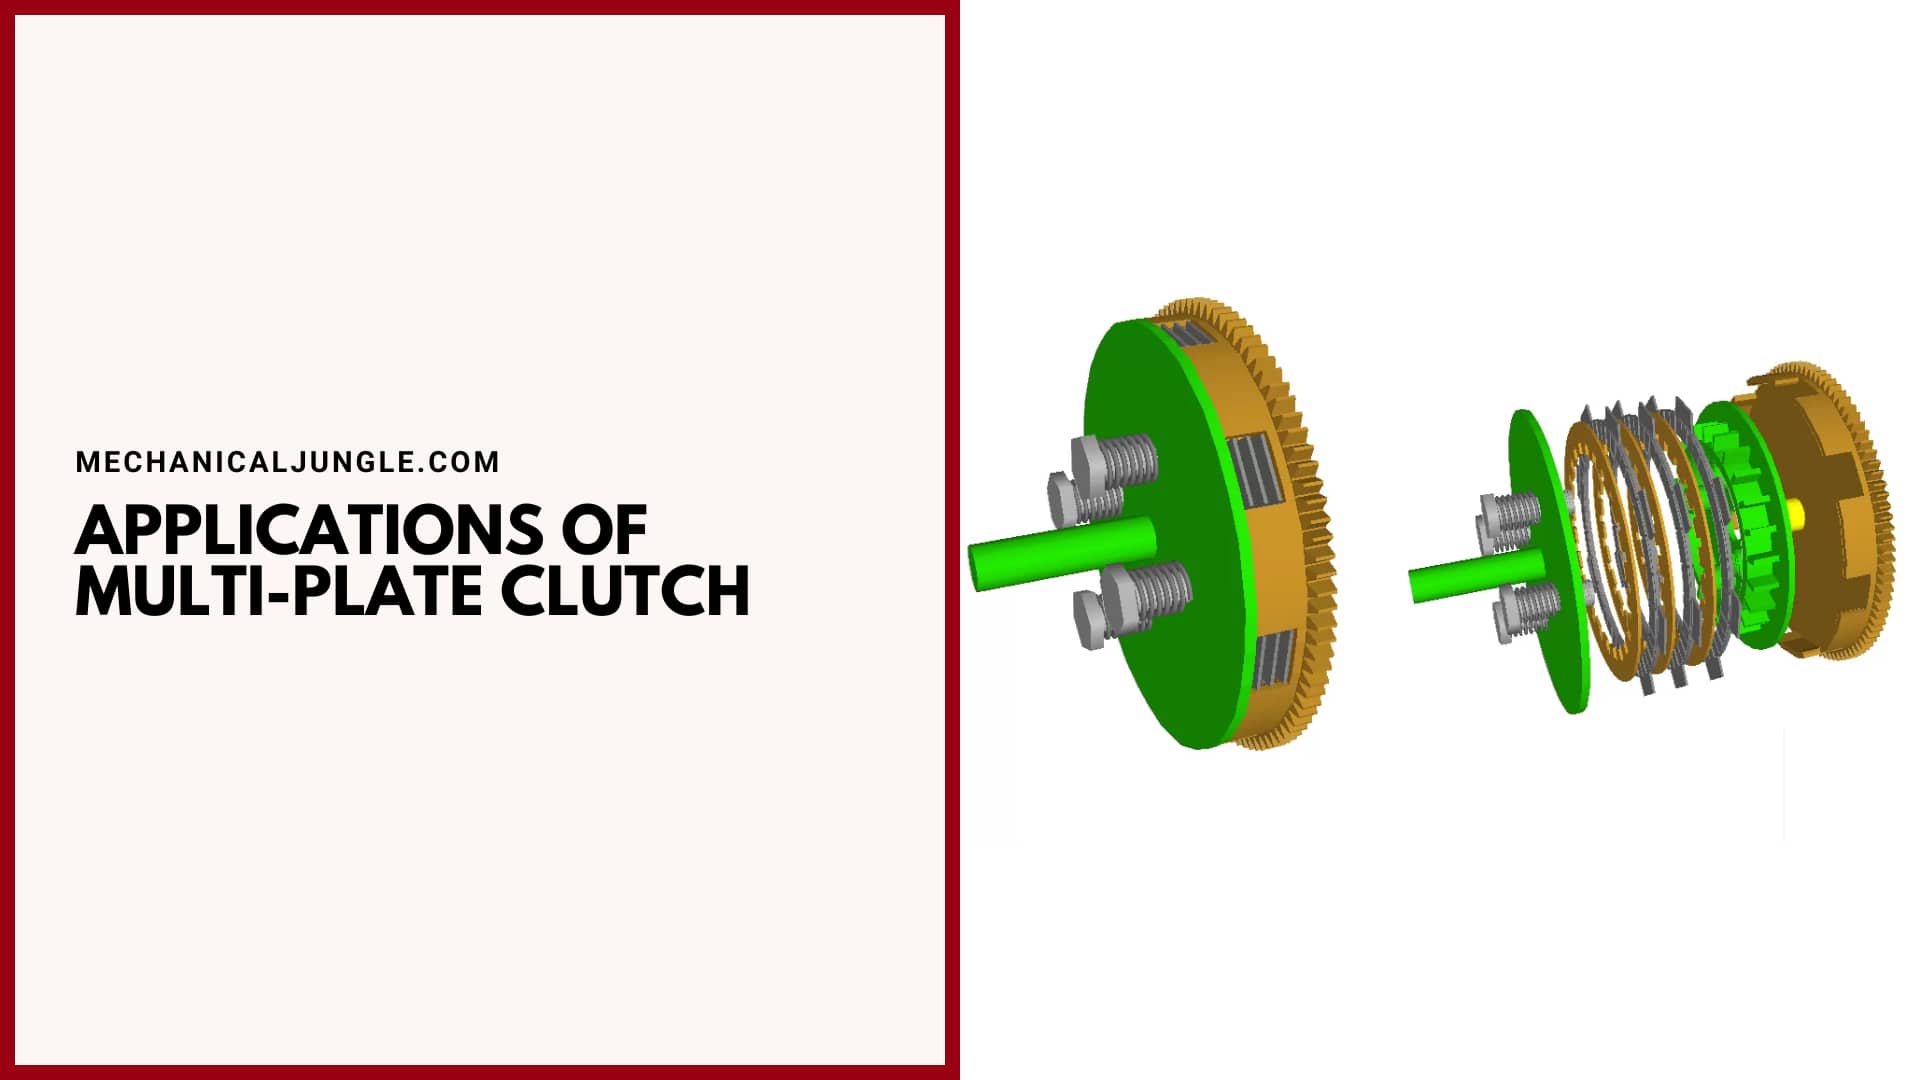 Applications of Multi-Plate Clutch